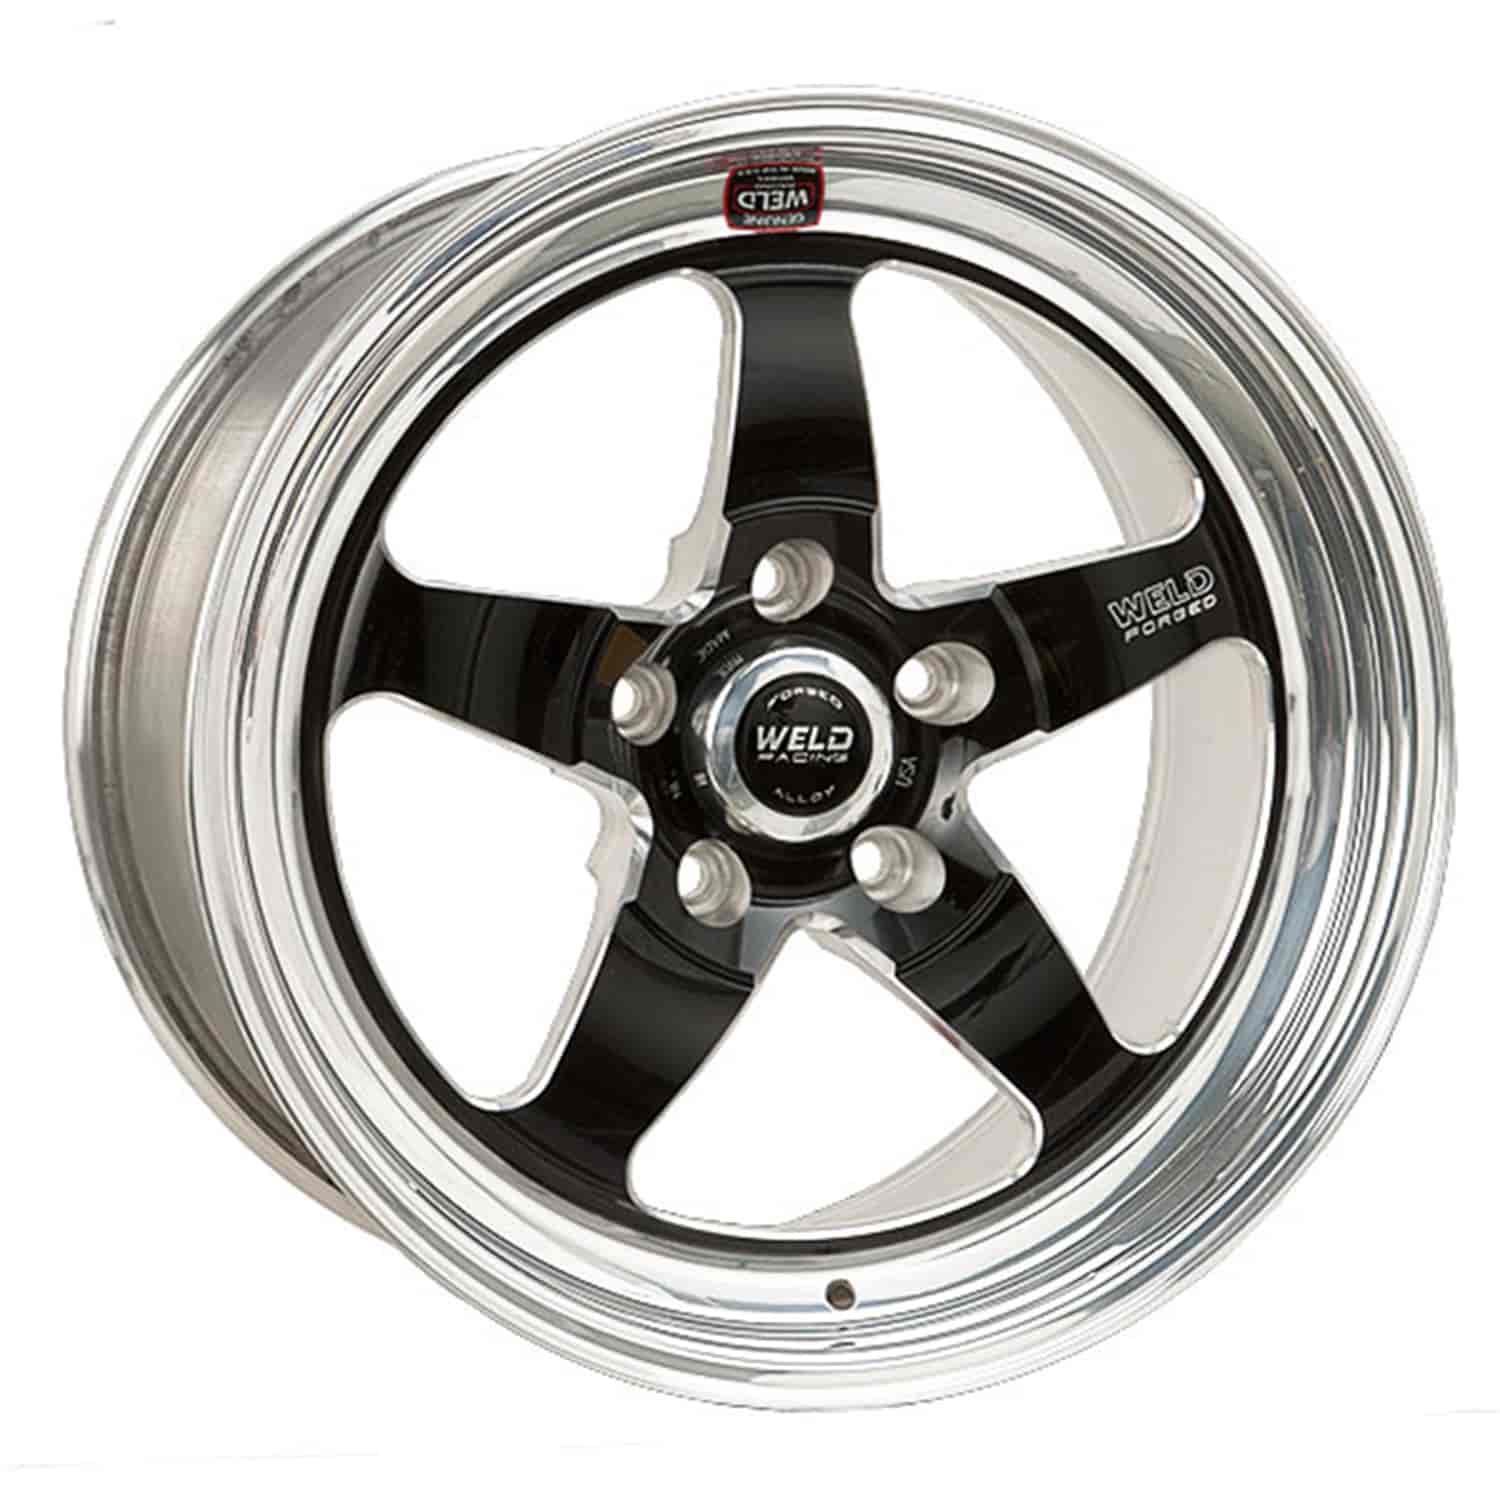 RT-S Series Wheel Size: 15" x 8" Bolt Circle: 5 x 4-3/4" Back Space: 4-1/2"